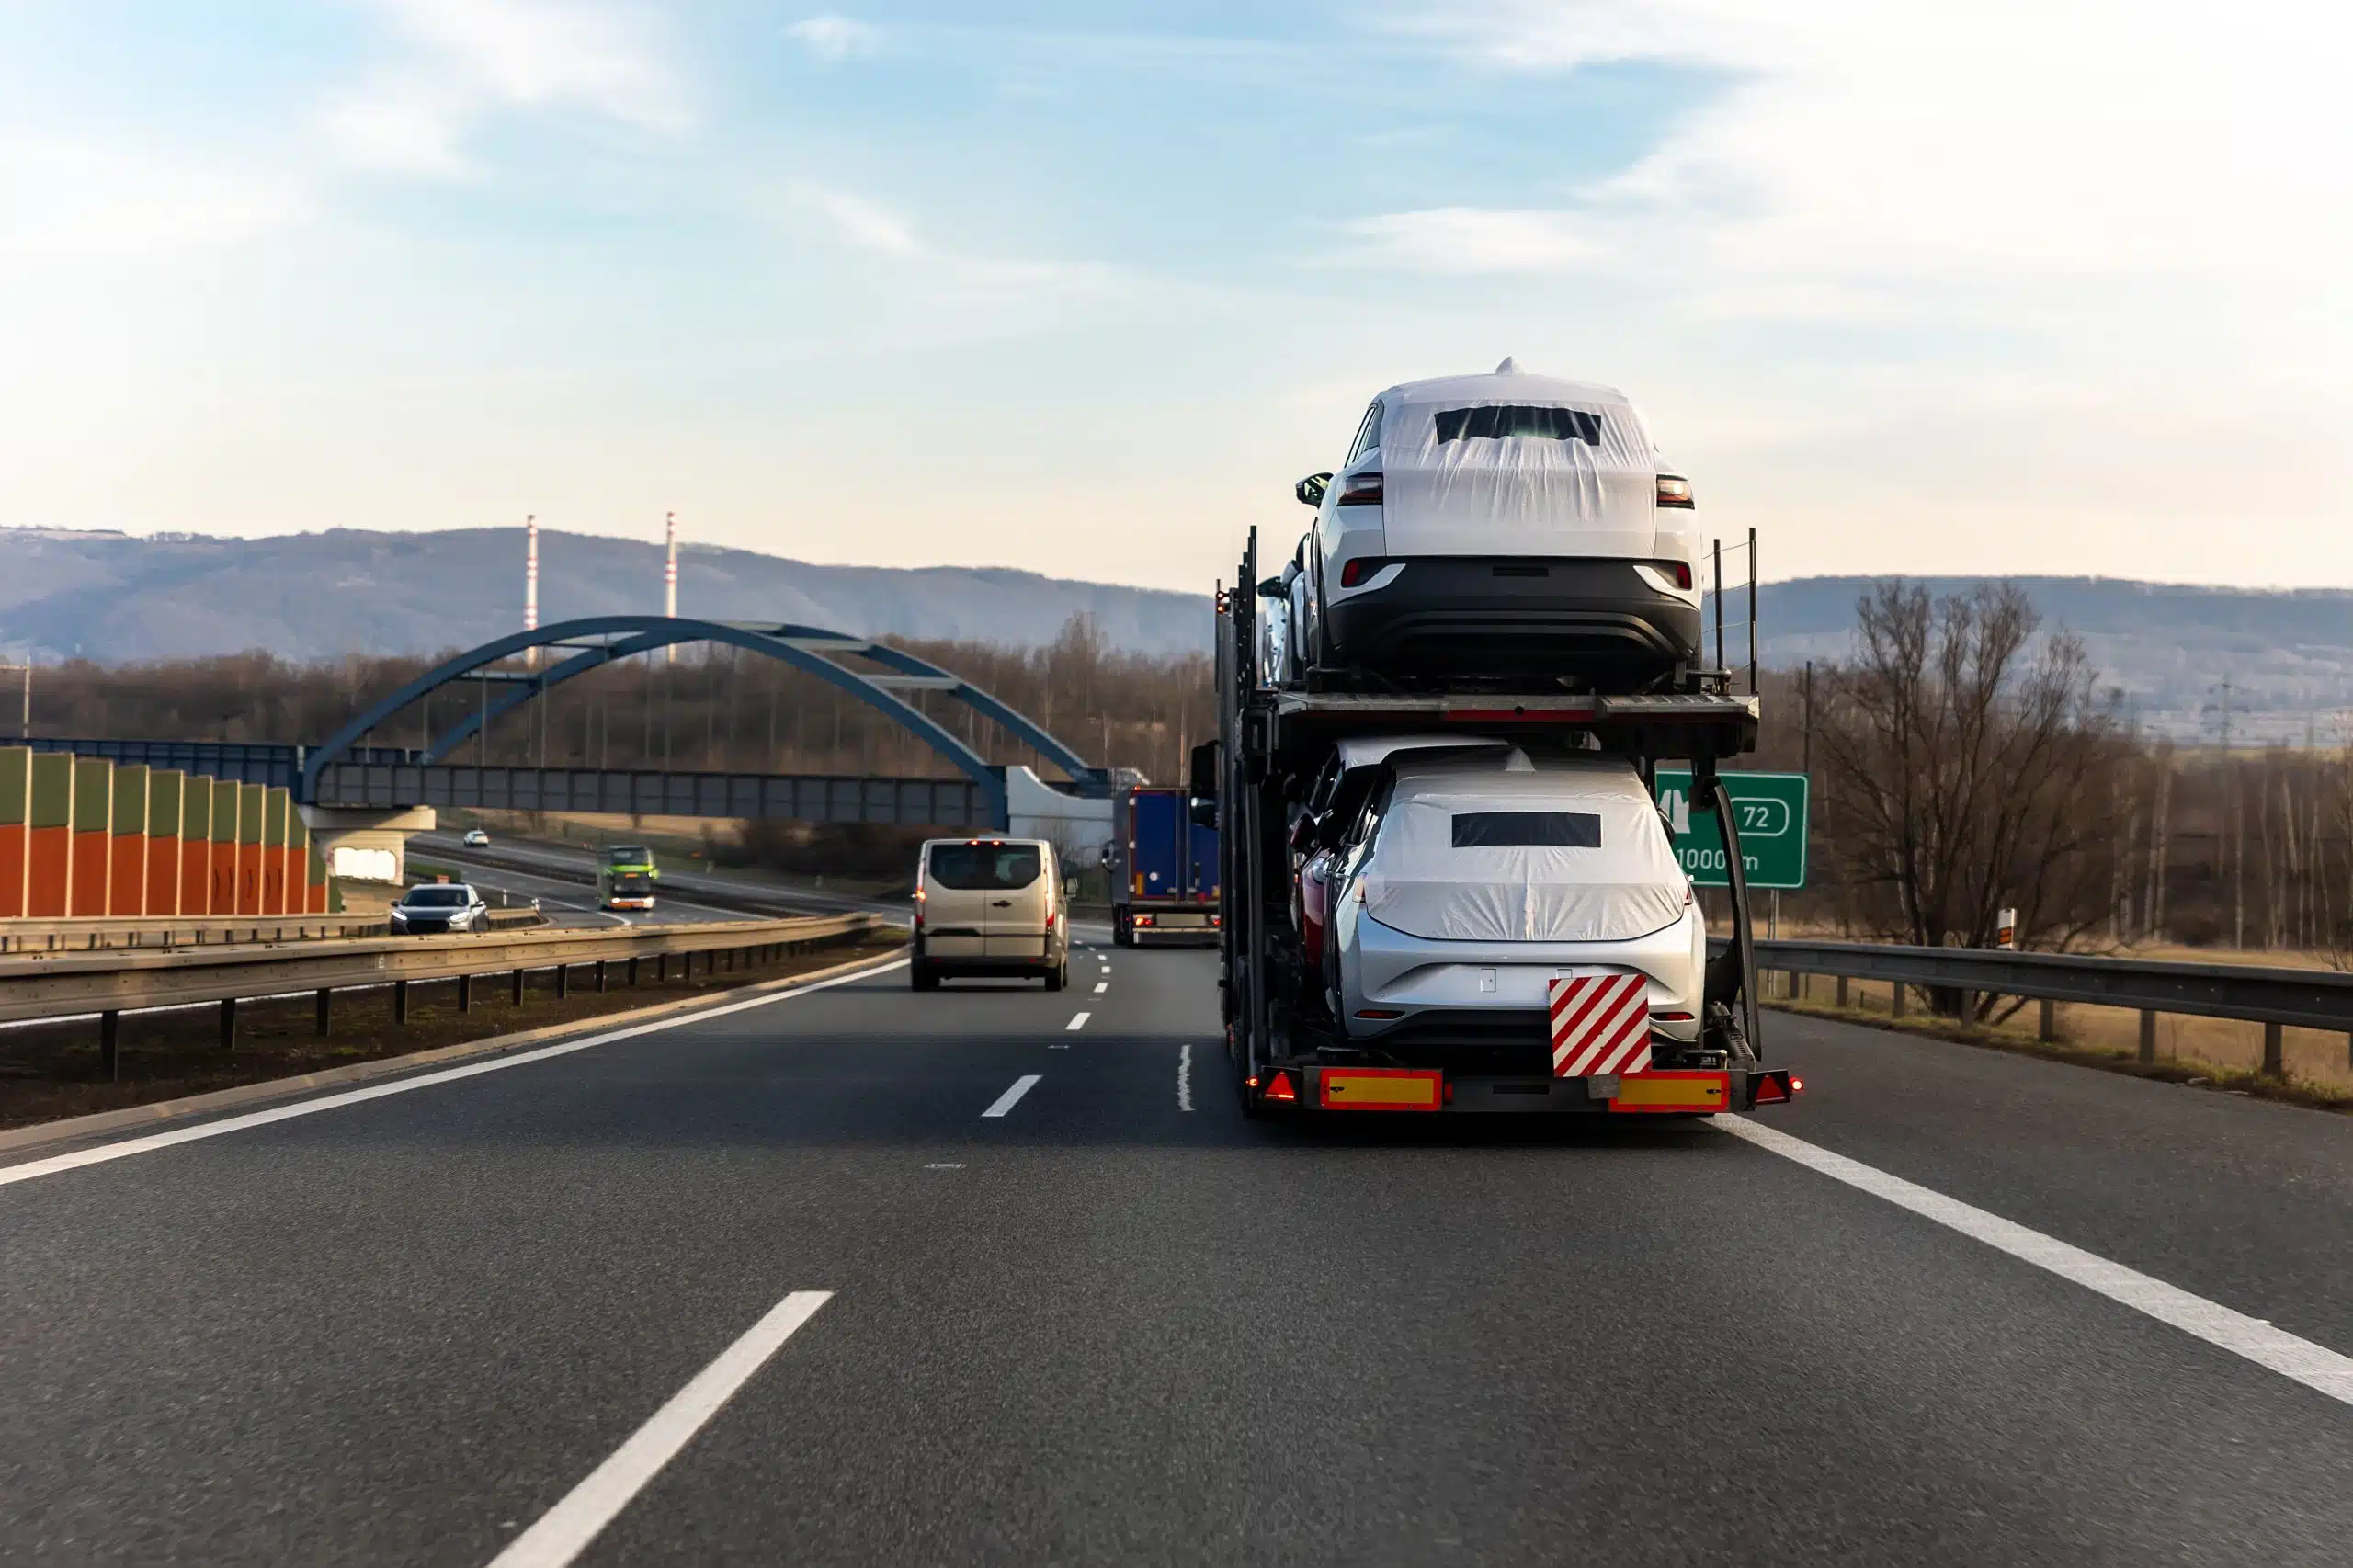 Tow truck car carrier semi trailer on highway carrying batch of new wrapped electric SUVs on